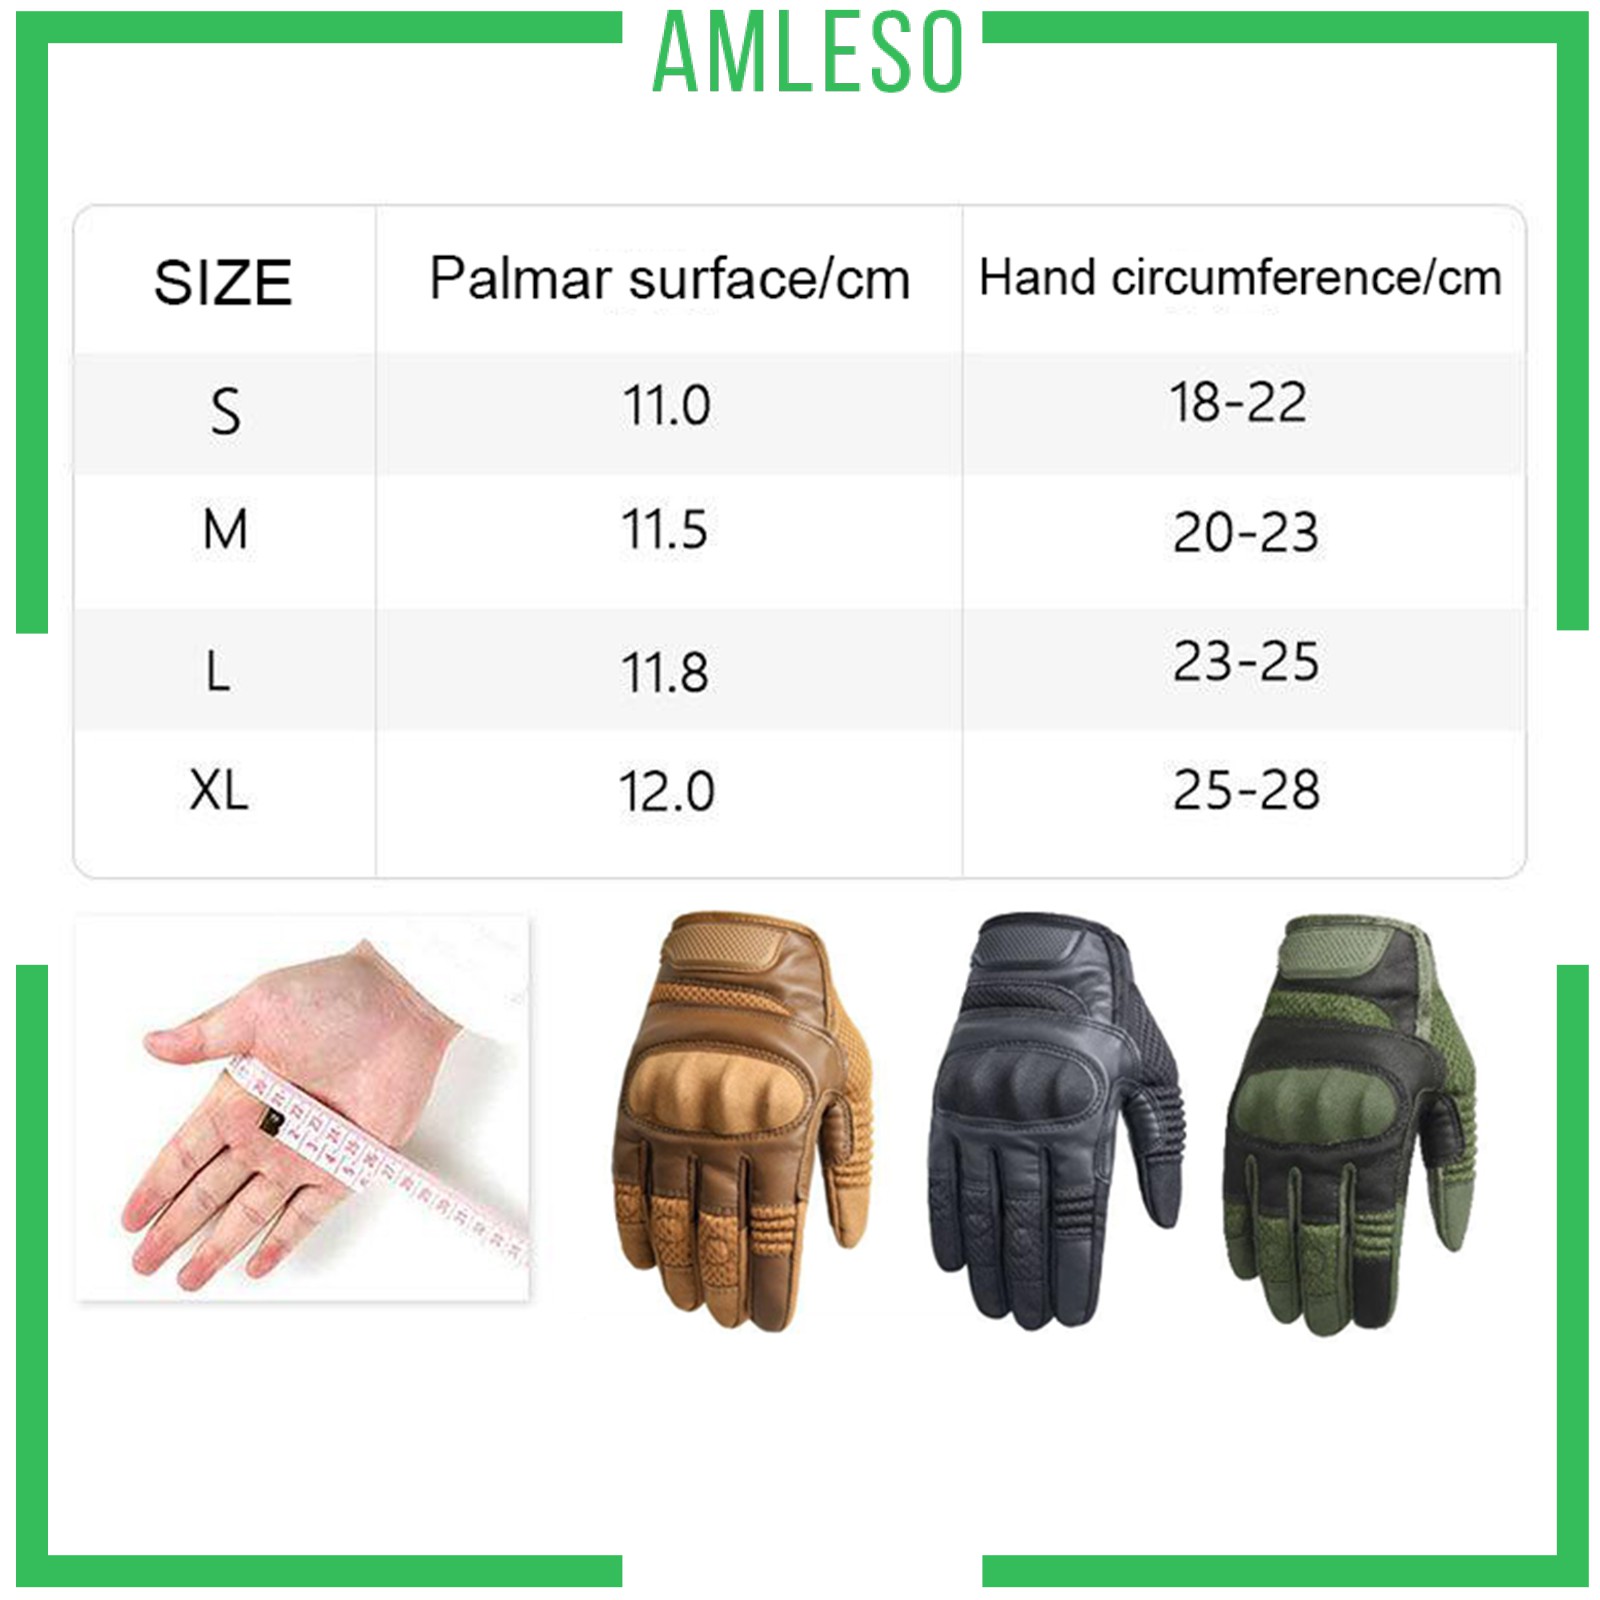 [AMLESO] 2xWinter Thermal Ski Gloves Touchscreen Waterproof Snow Motorcycle Gloves Male